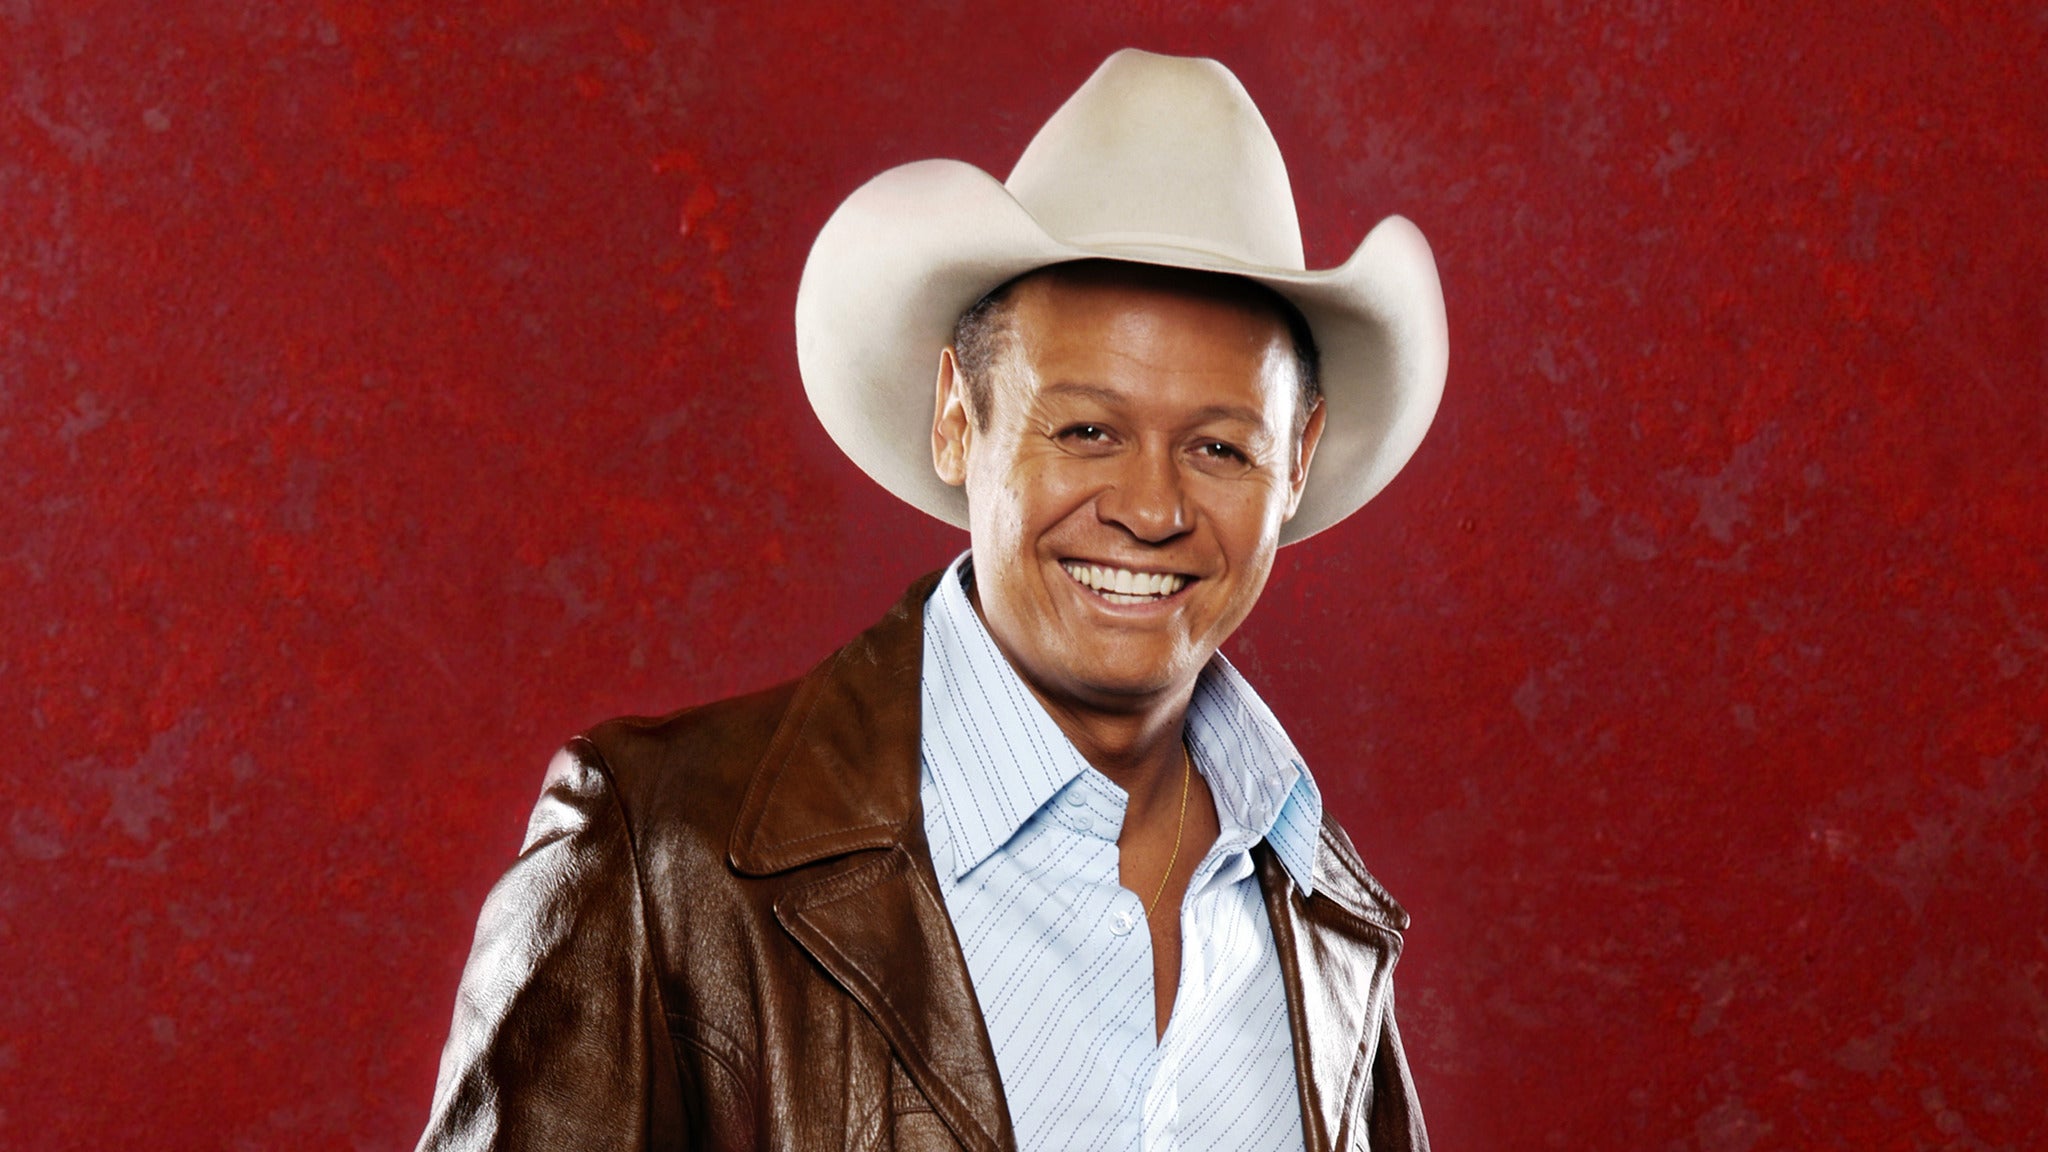 Neal McCoy Tickets, 2021 Concert Tour Dates Ticketmaster